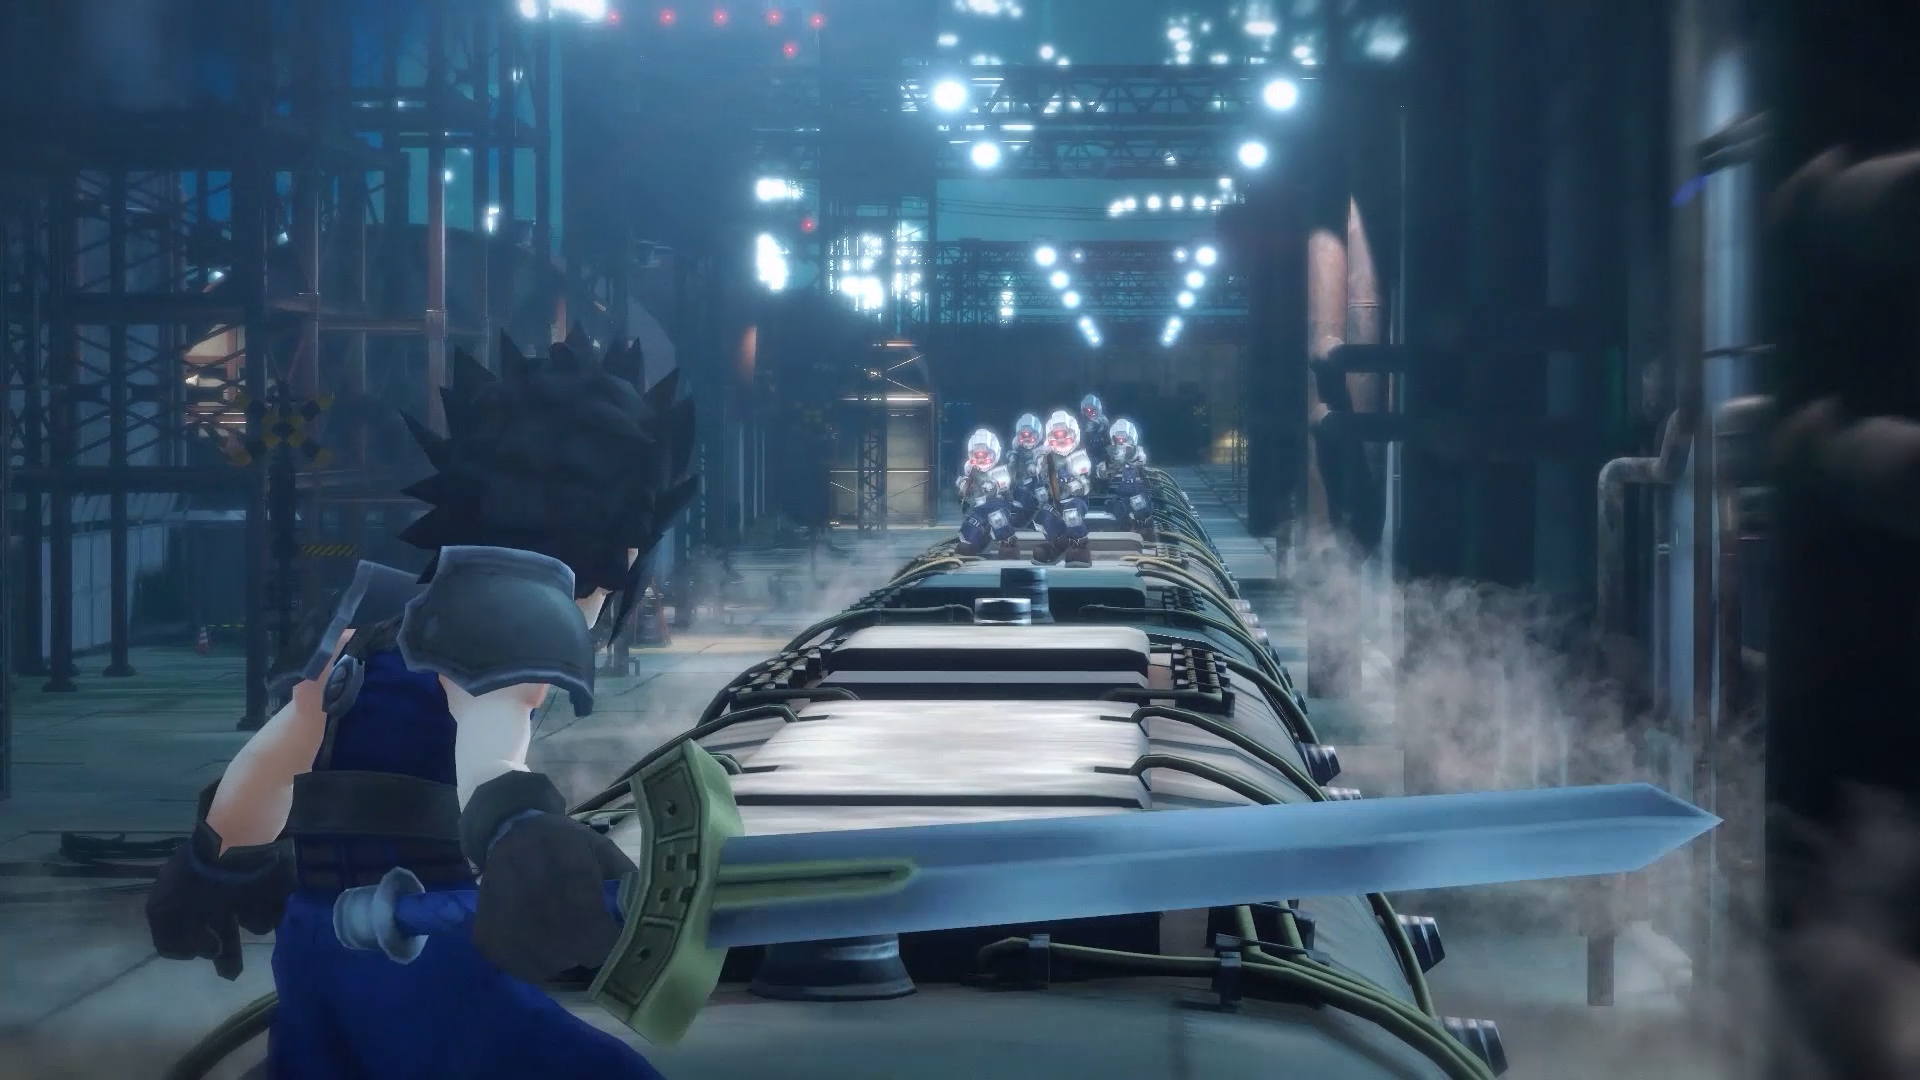 Final Fantasy VII Retells Its Epic Story On Switch And Xbox One